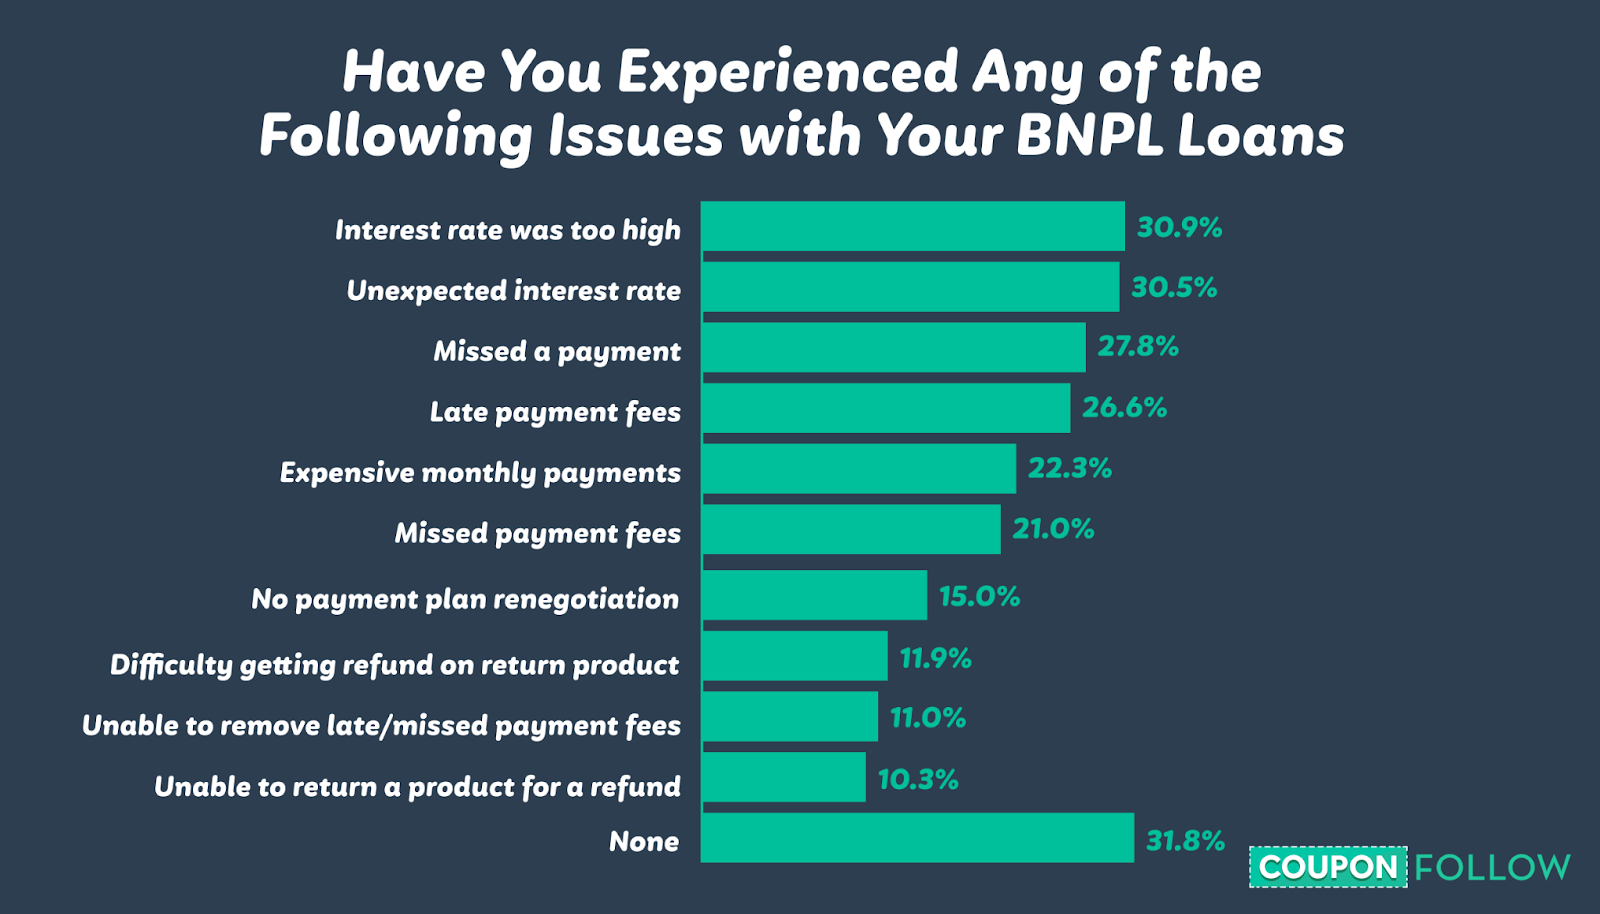 Common BNPL loans issues